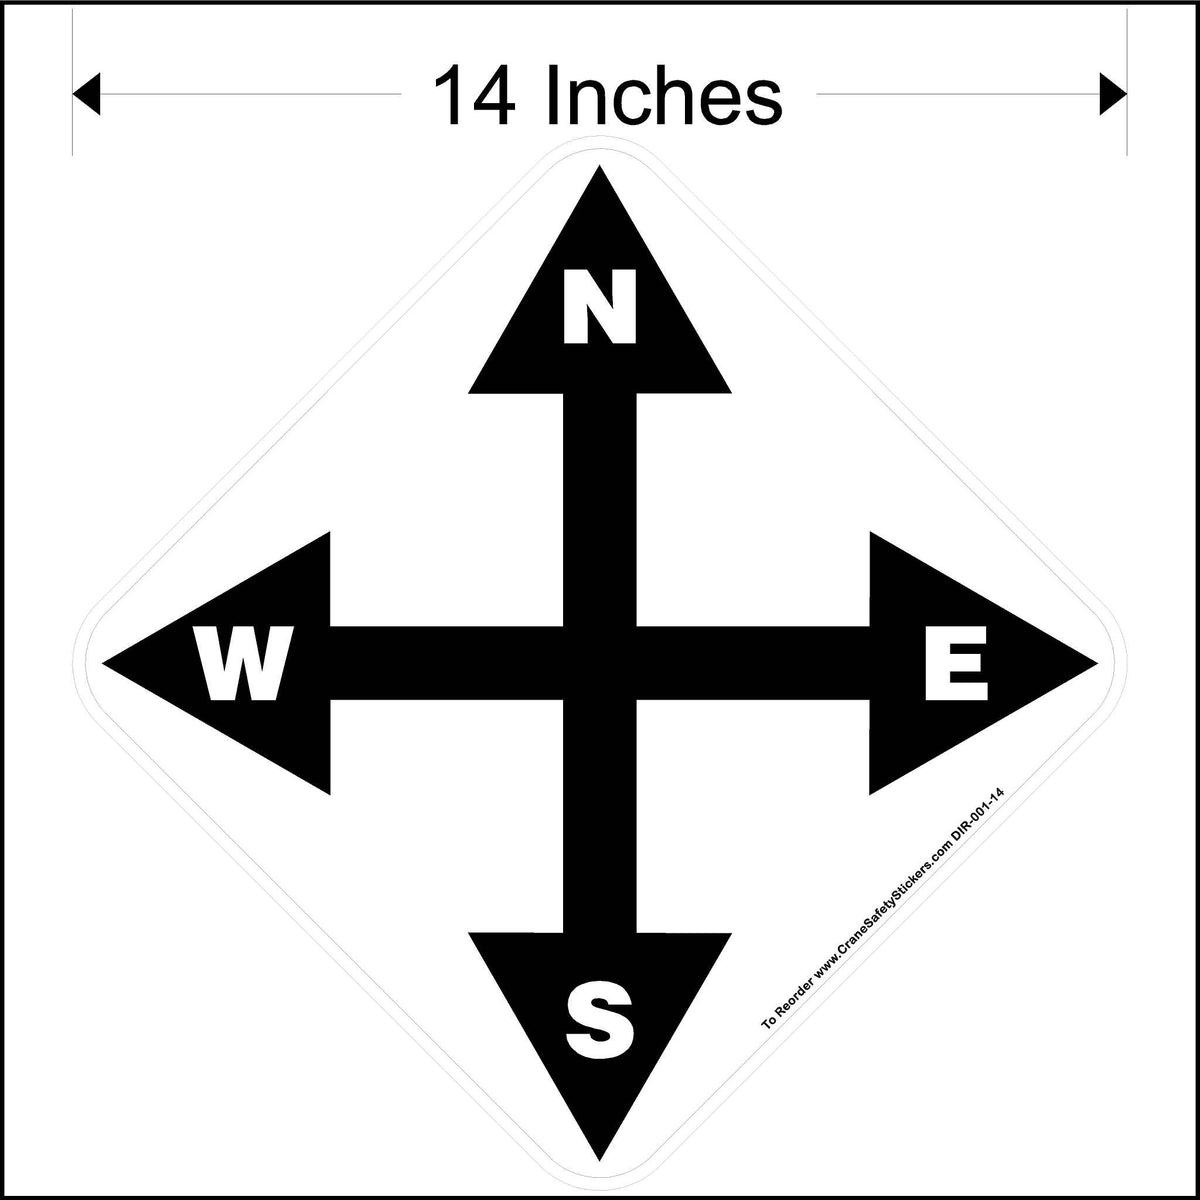 14 Inch North South East West Overhead Crane Directional Decal.